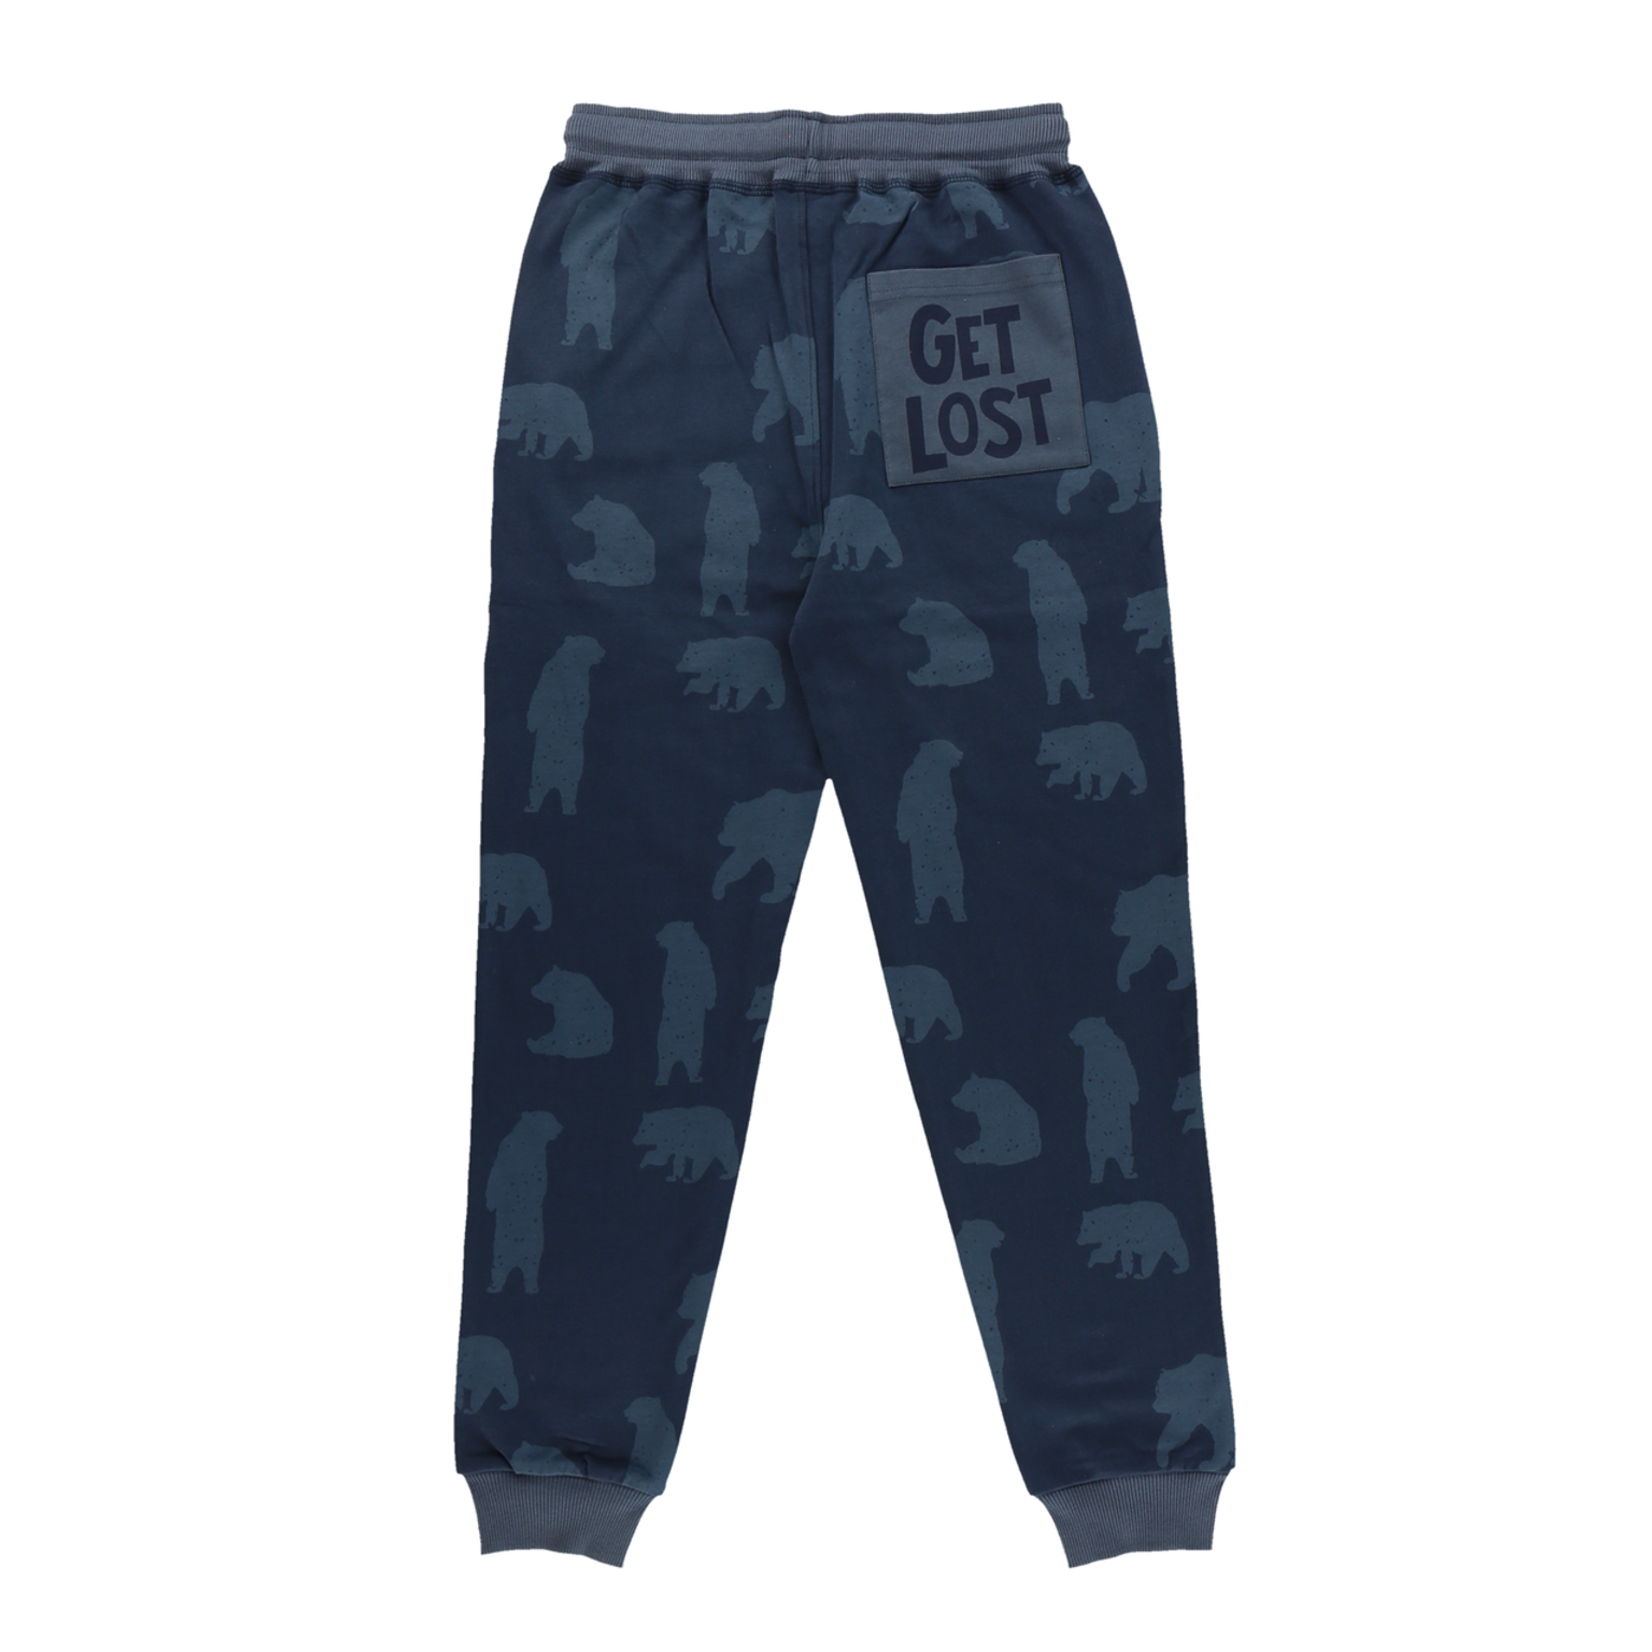 Lazy One Get Lost Men's Joggers